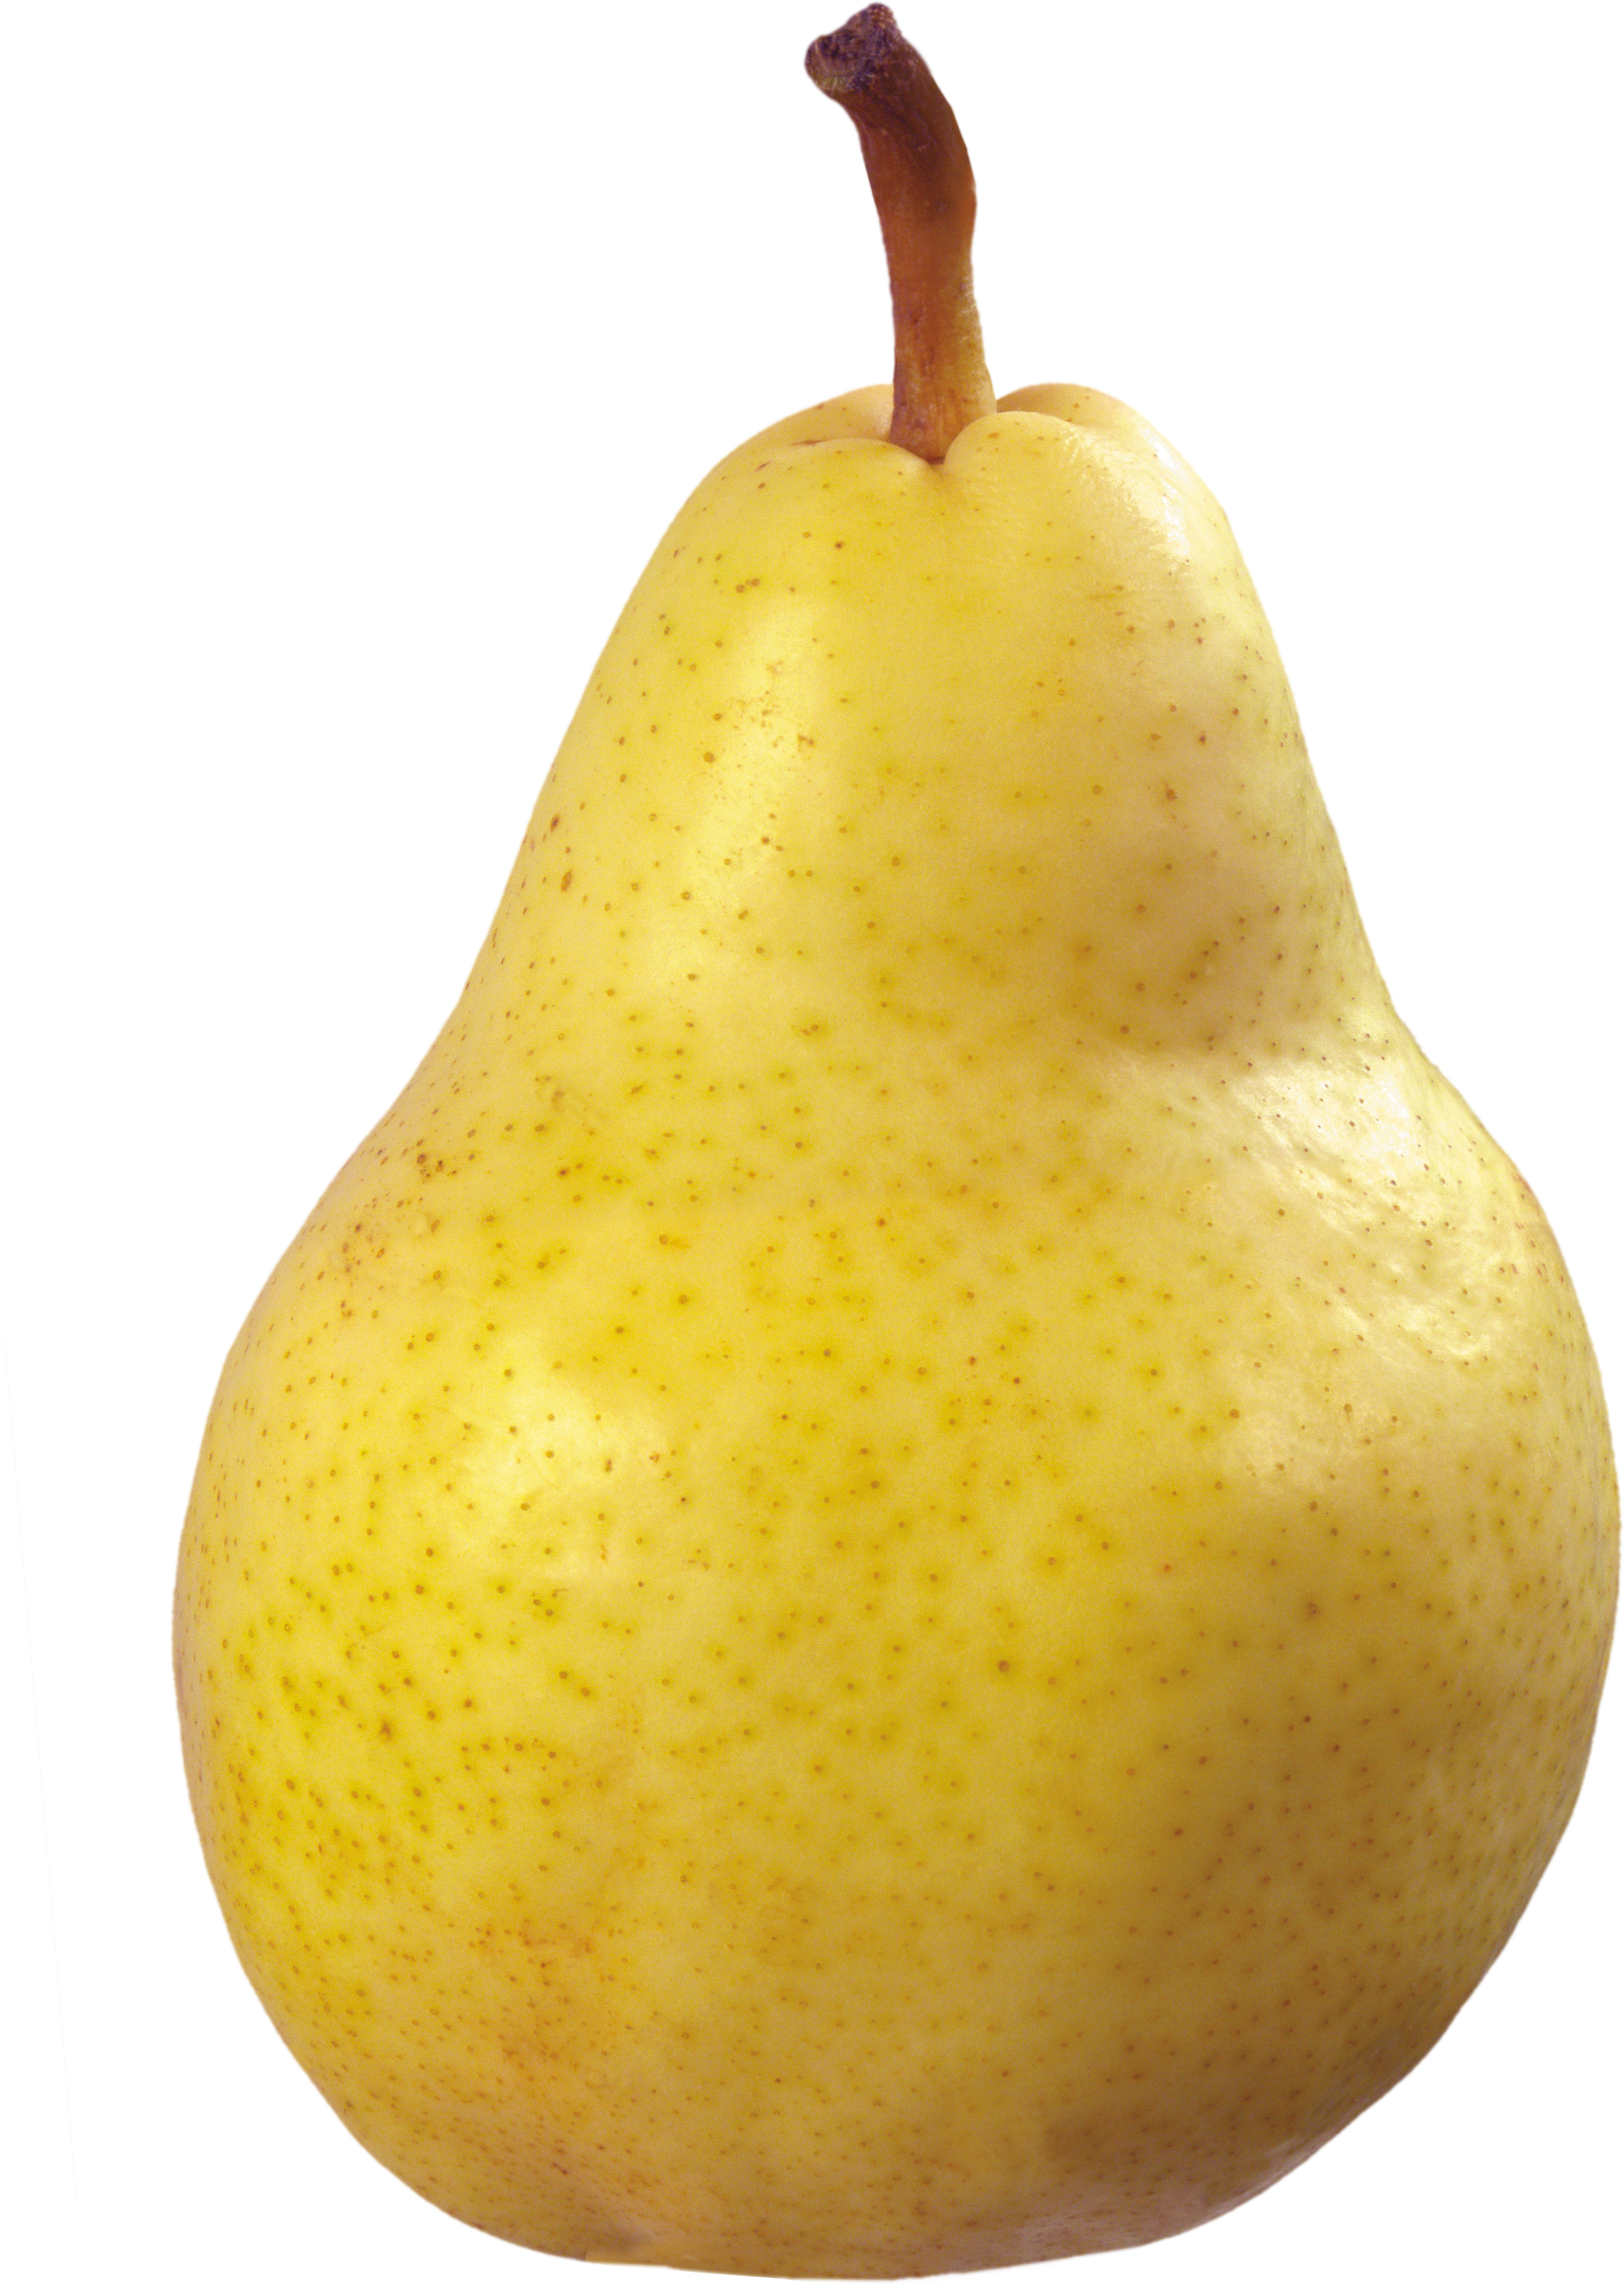 Green Organic Pears Free Download PNG HD PNG Image